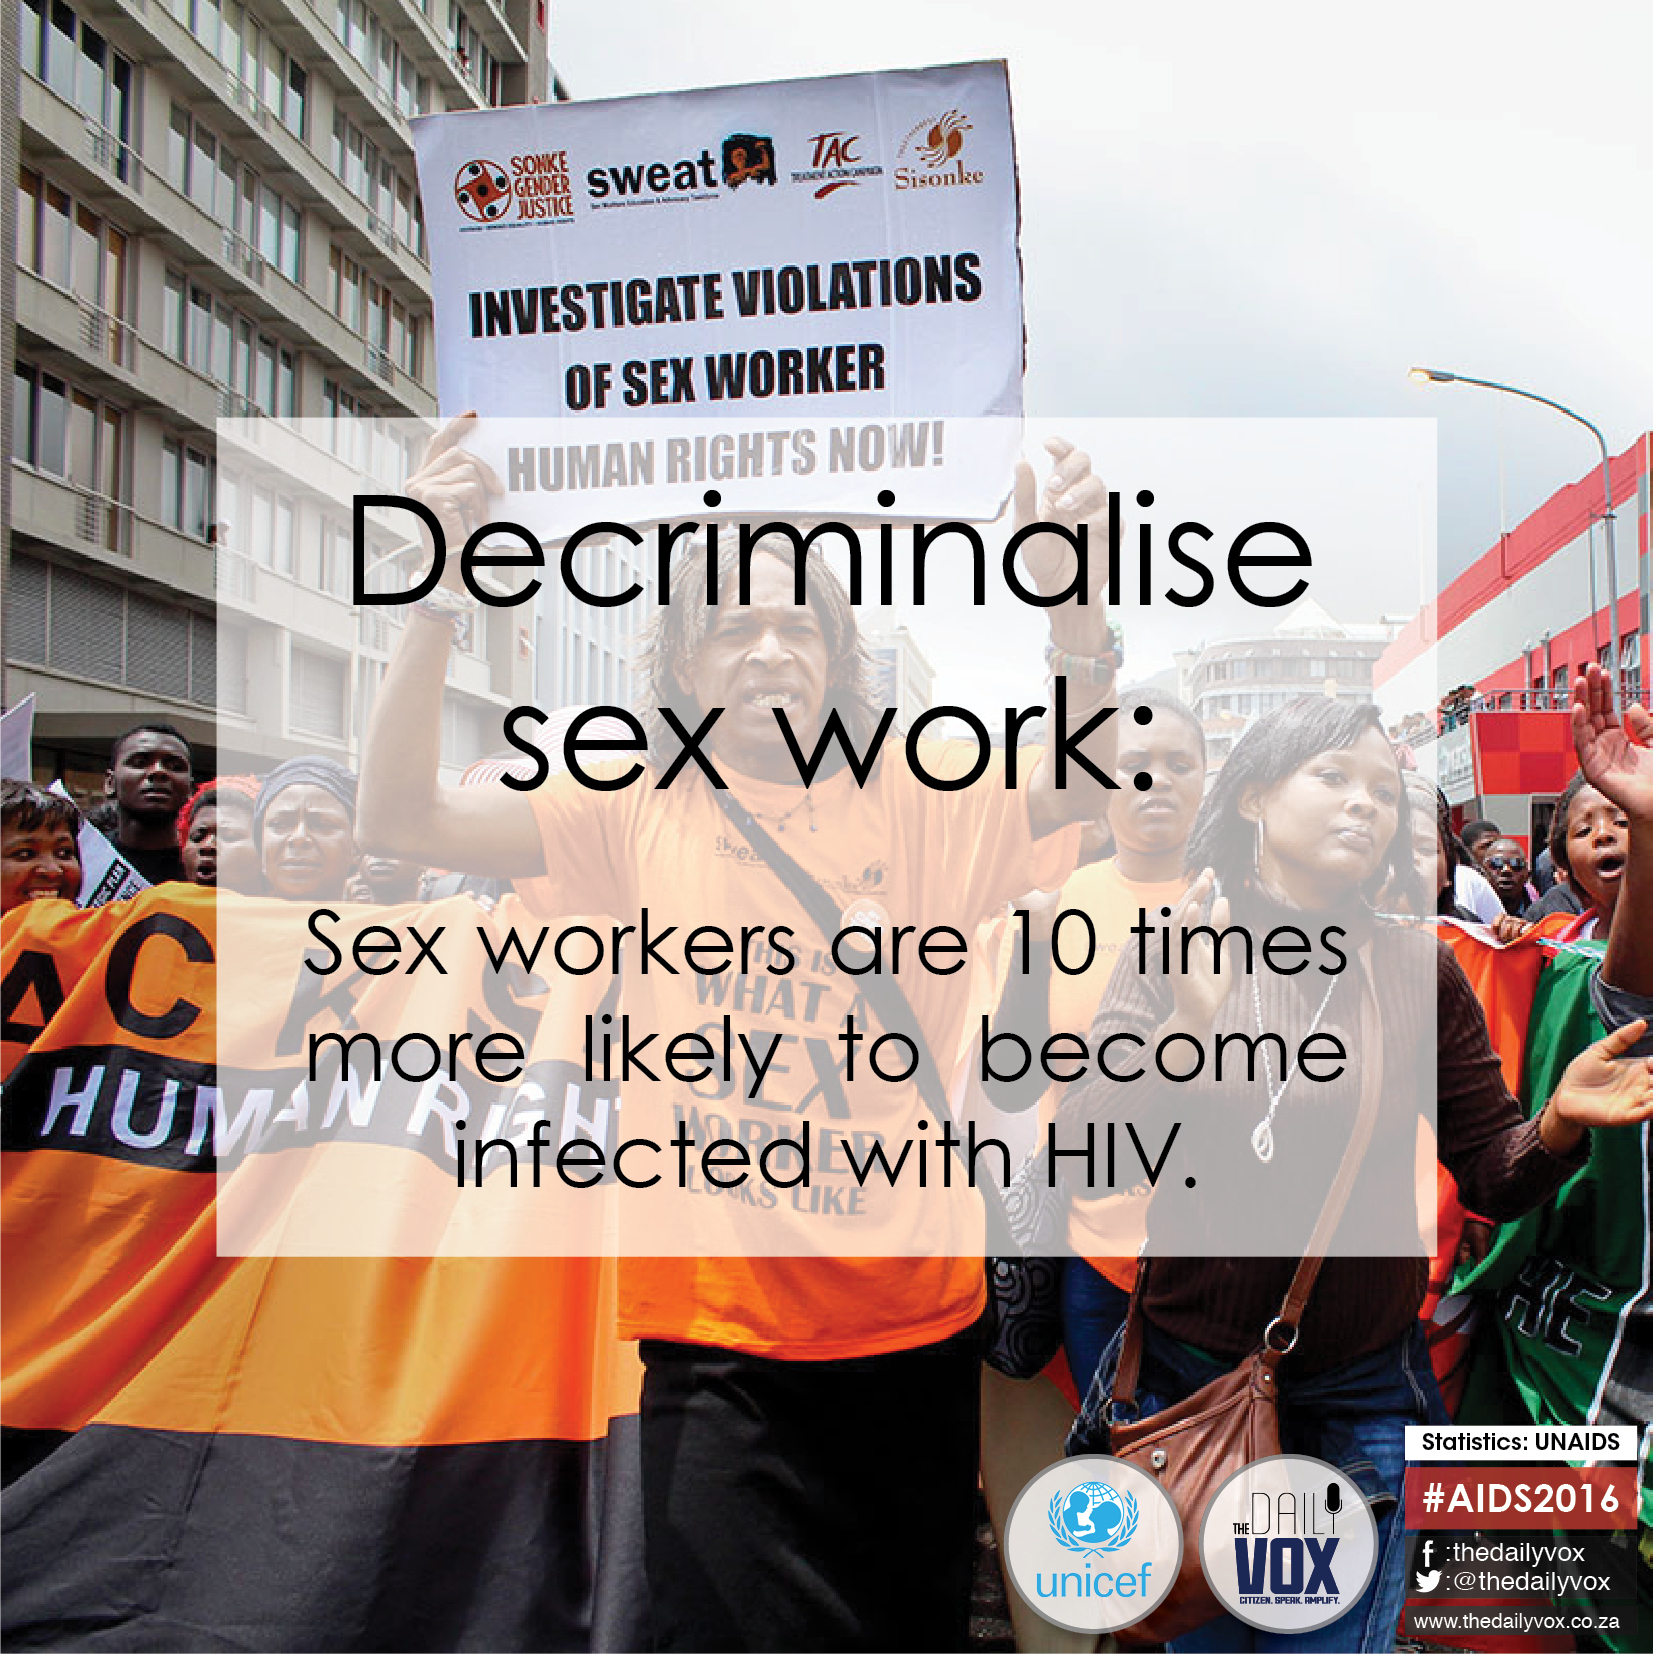 READ ALSO: What it's like to be a transwoman fighting for sex workers' rights at #AIDS2016